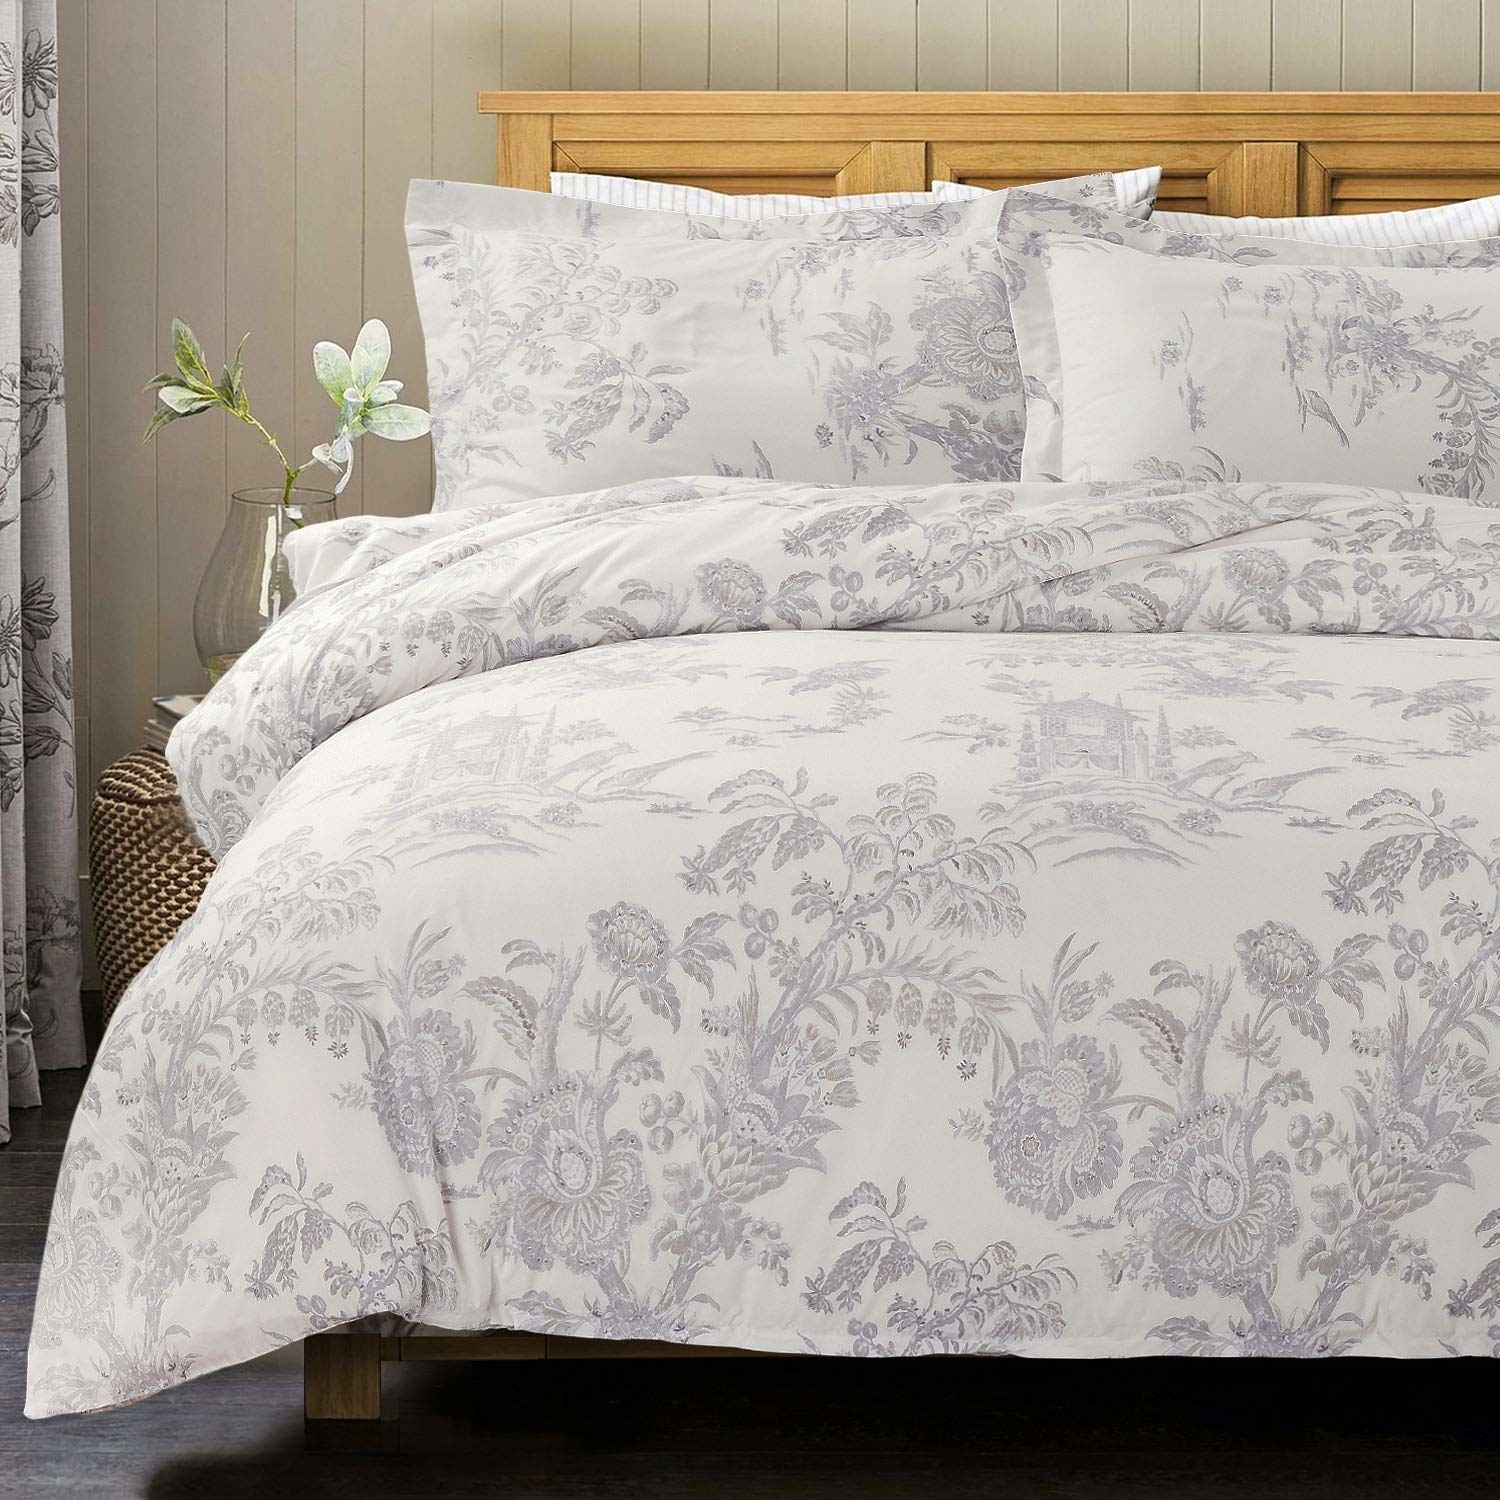 34 Of The Best Duvet Covers You Can Get On Amazon In 2018